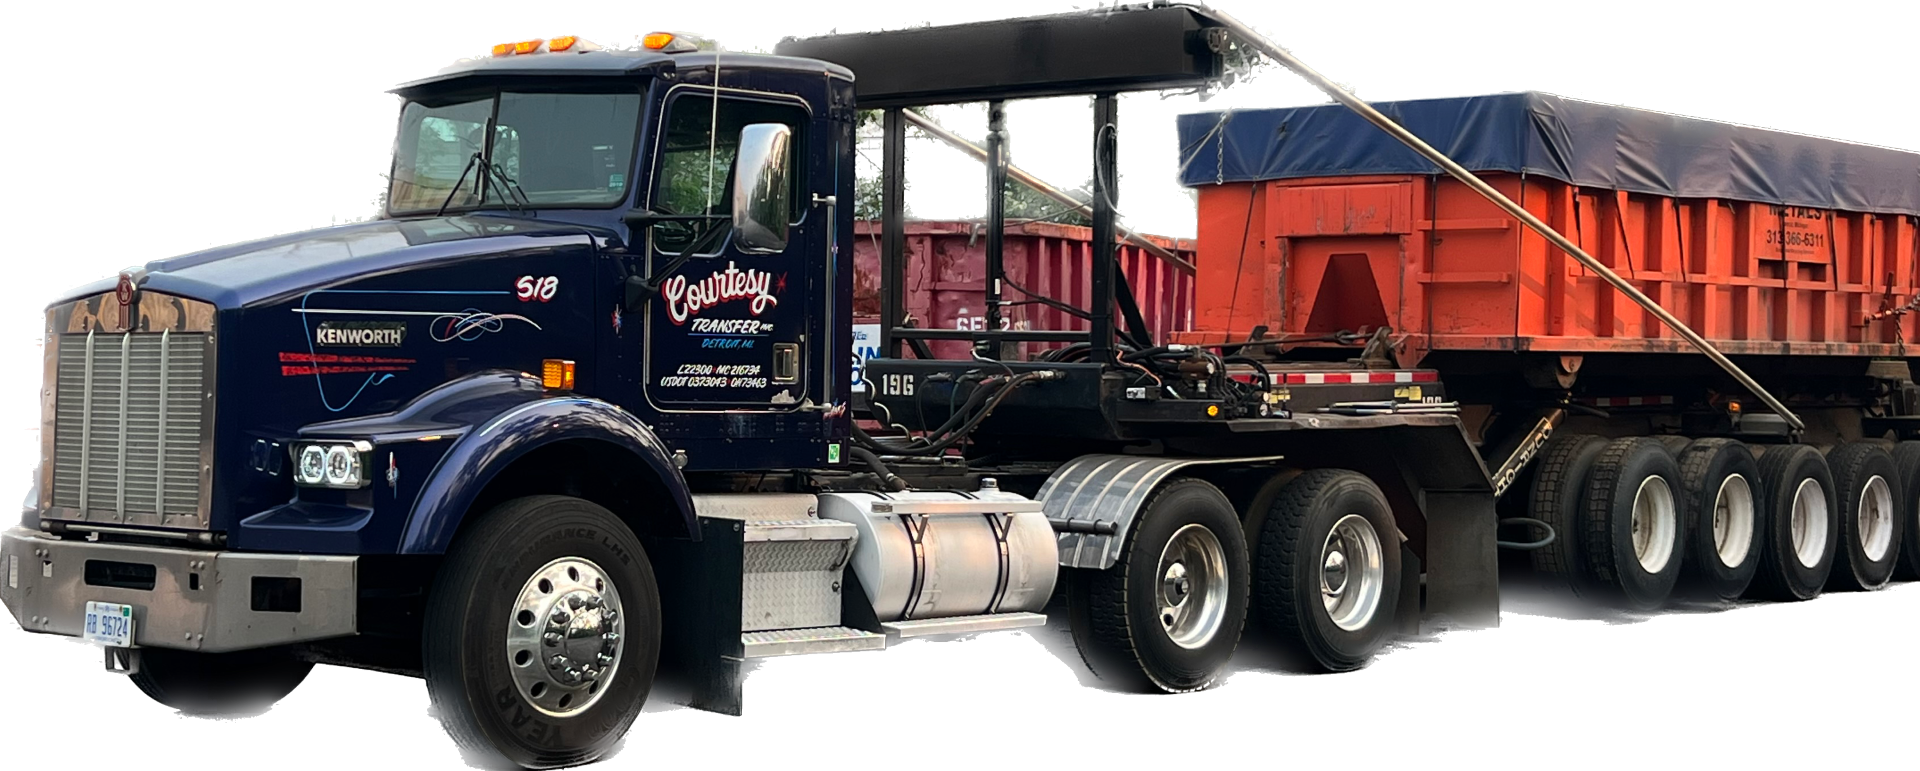 Courtesy Transfer Inc Roll-off Container Truck